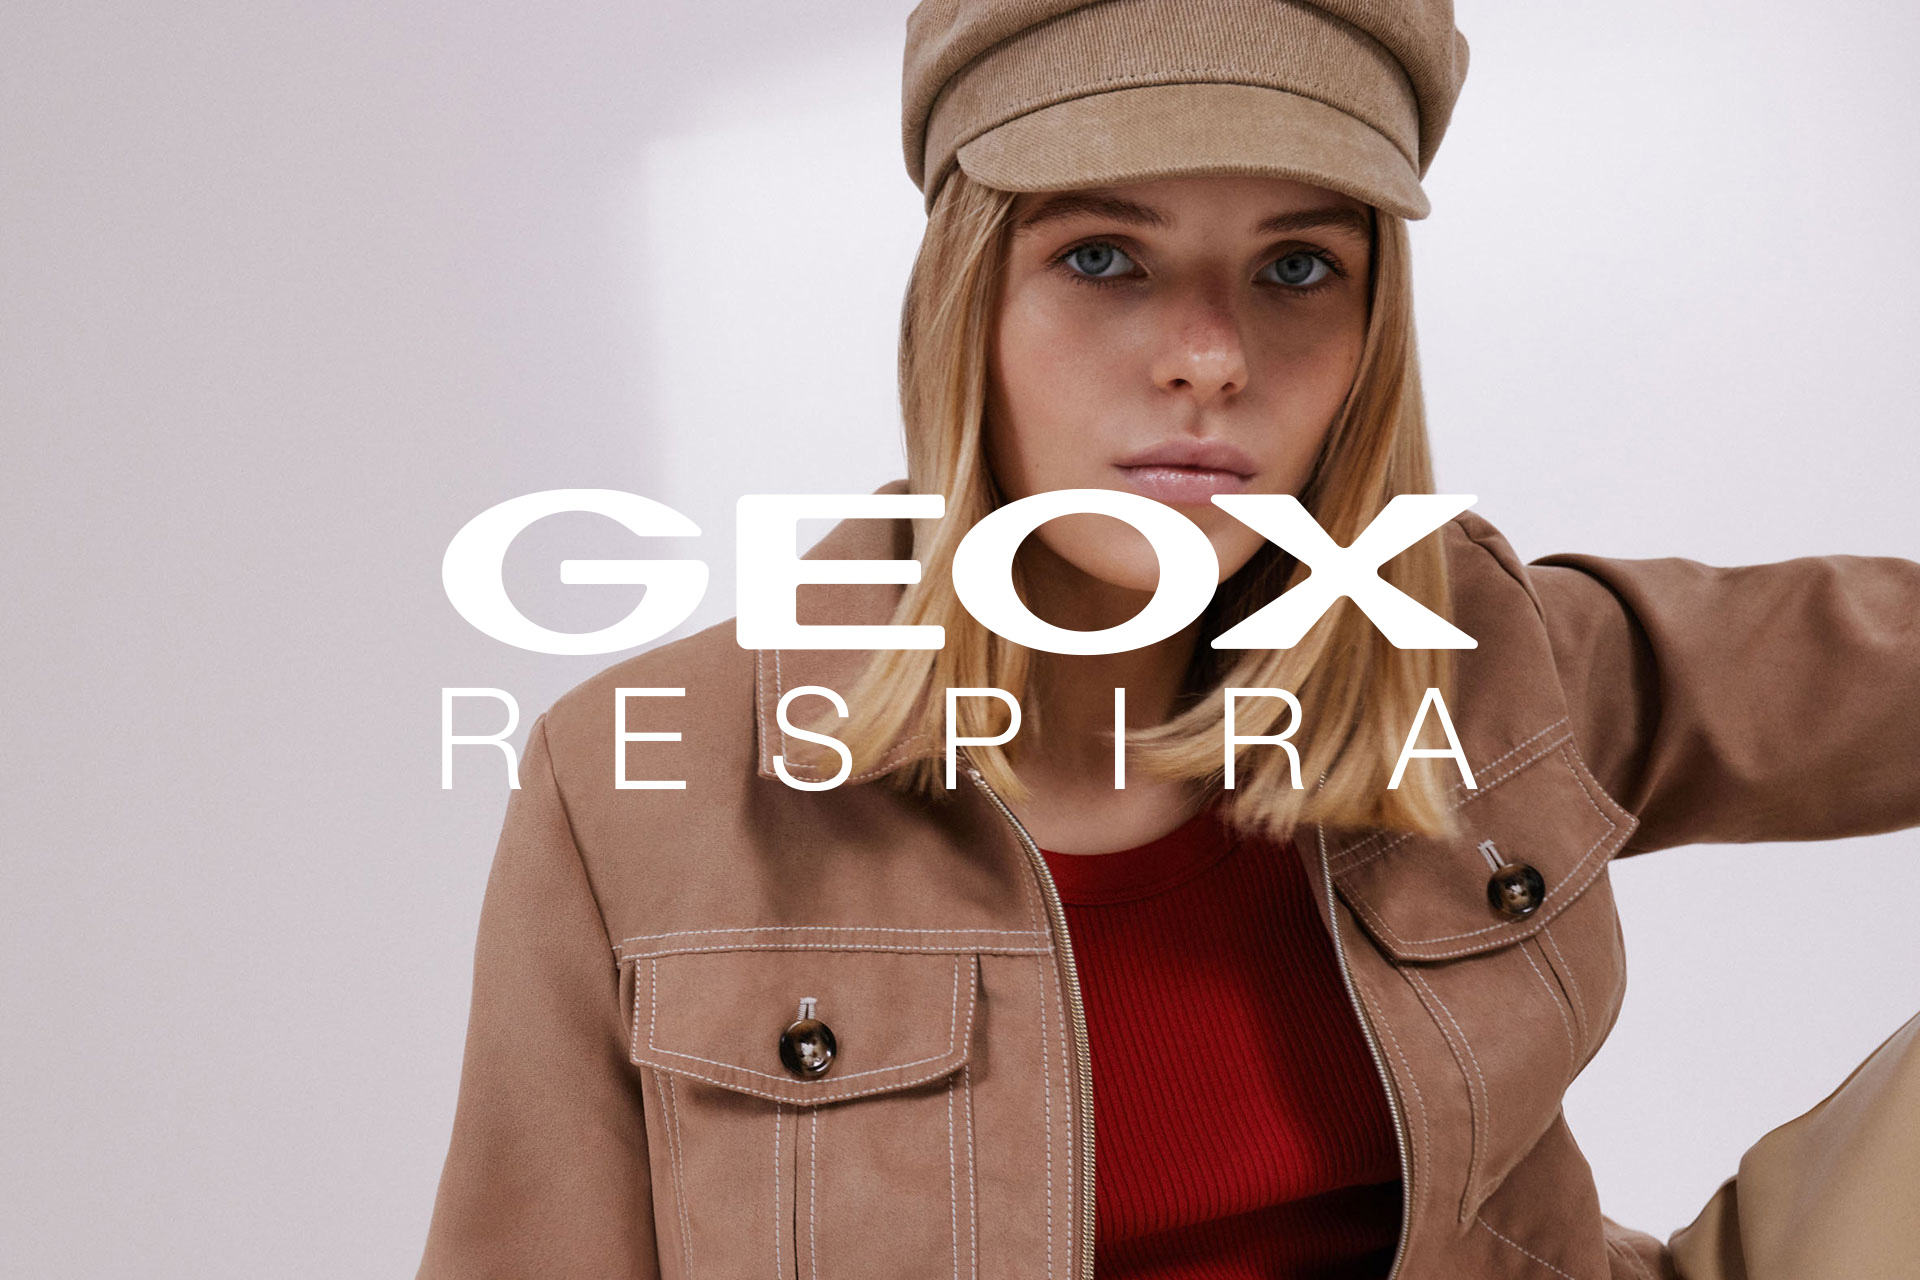 Geox S.p.A.